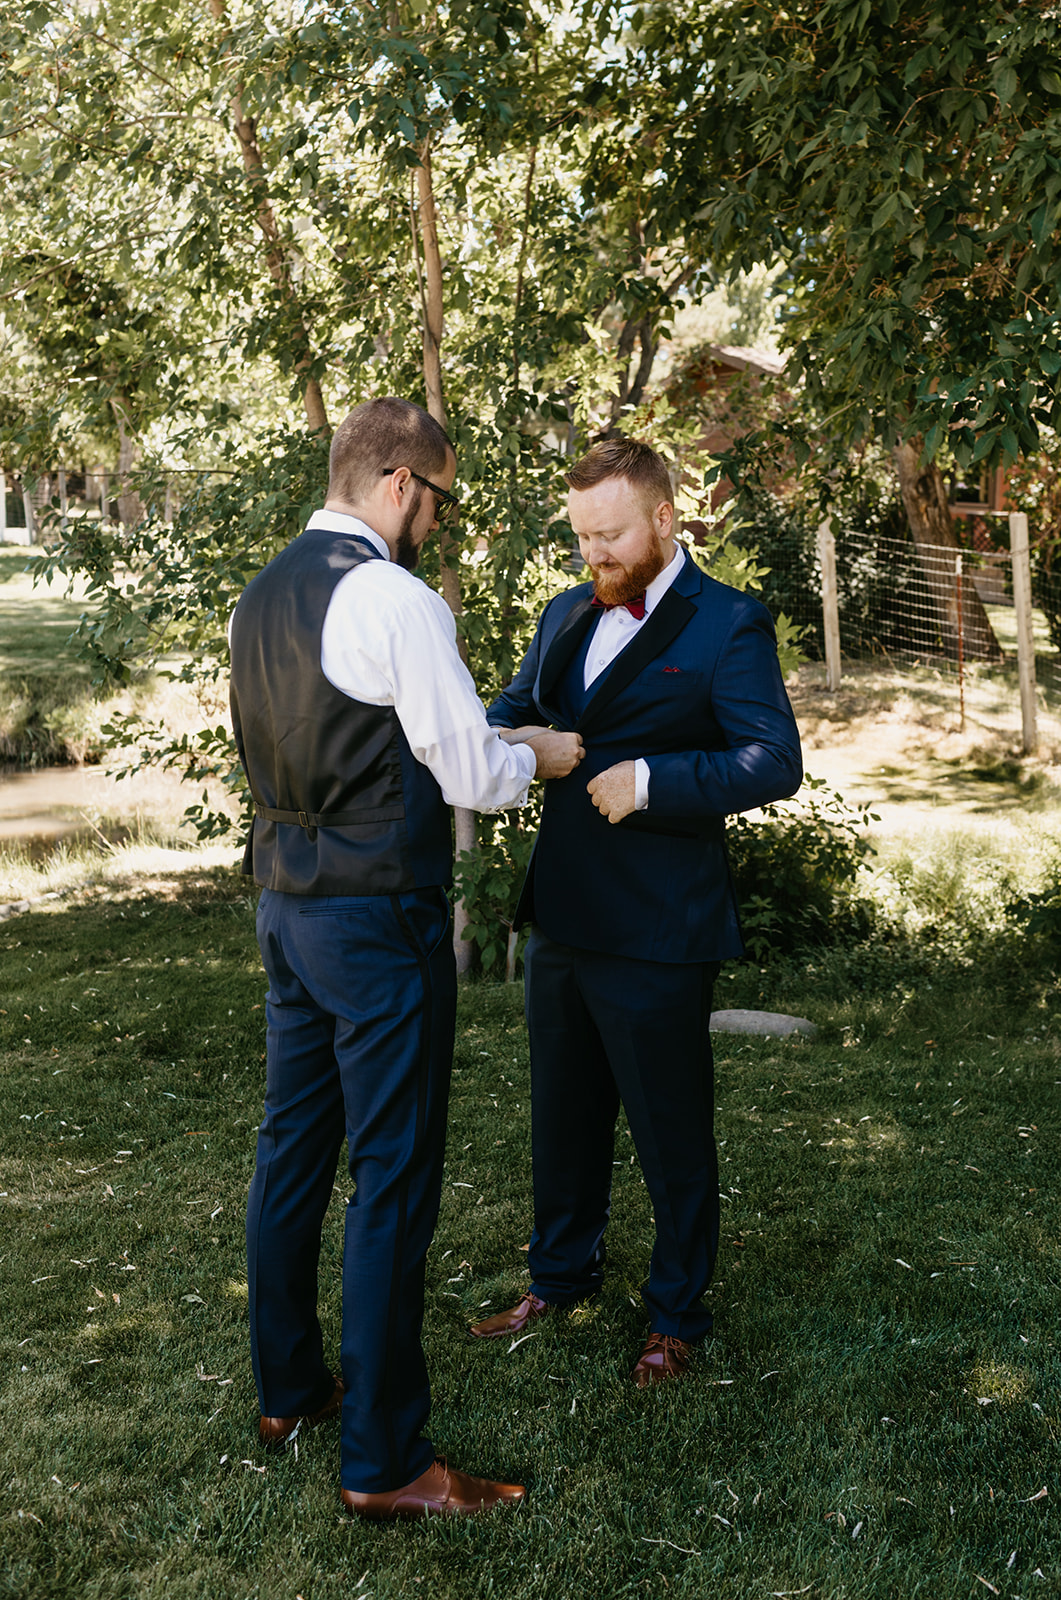 Grooms brother helps groom get ready for the wedding day